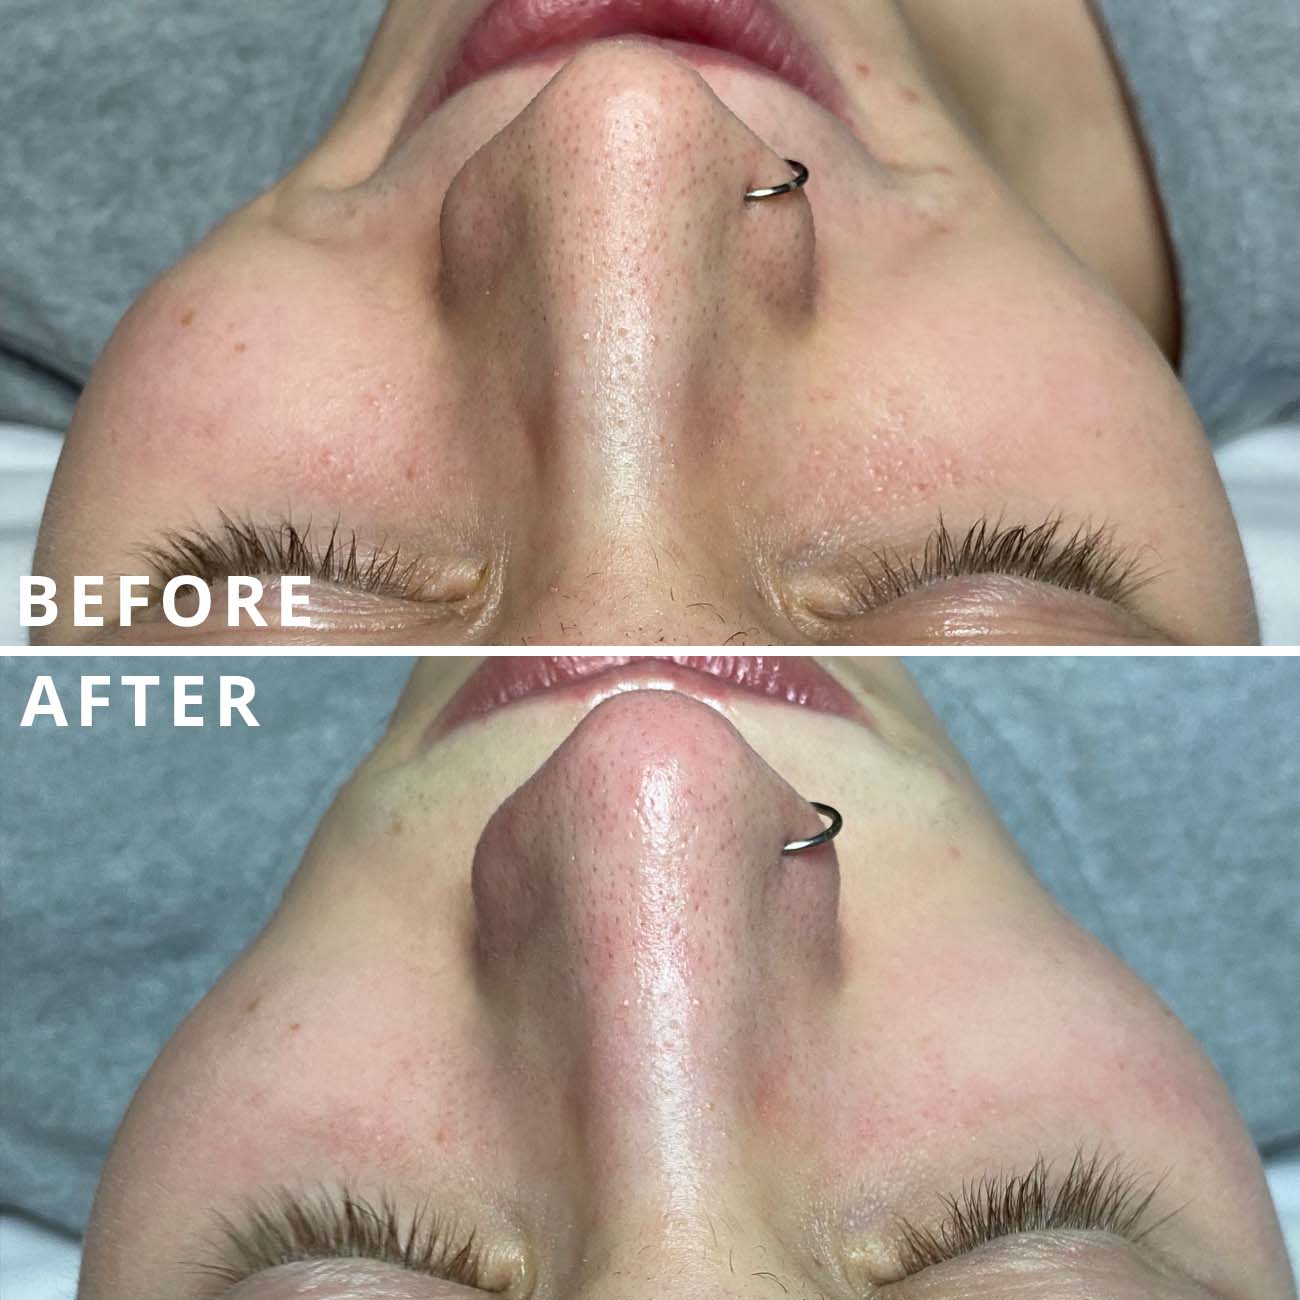 Before and after hydrafacial treatment.